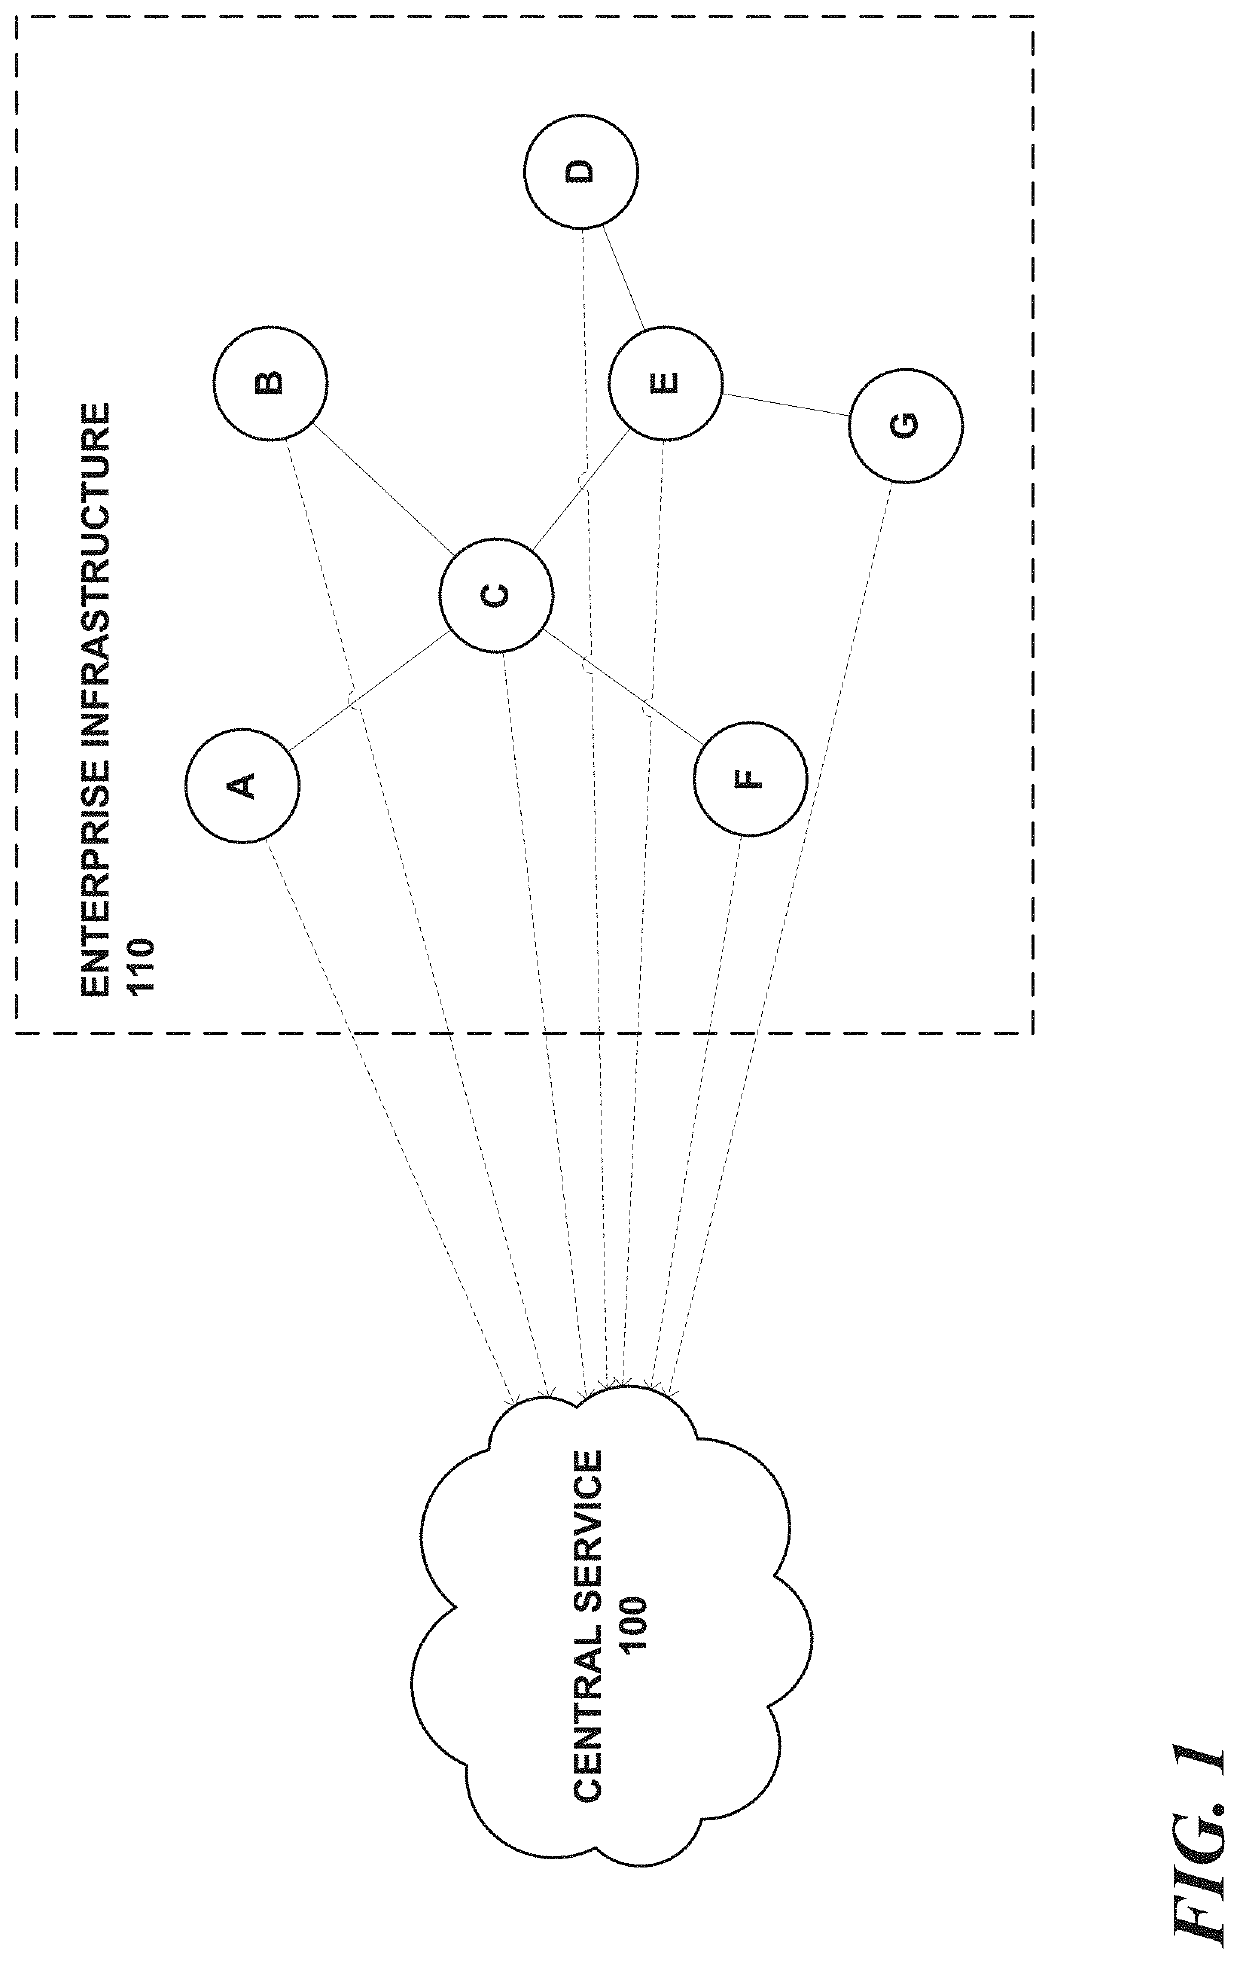 Methods and system for characterizing infrastructure security-related events